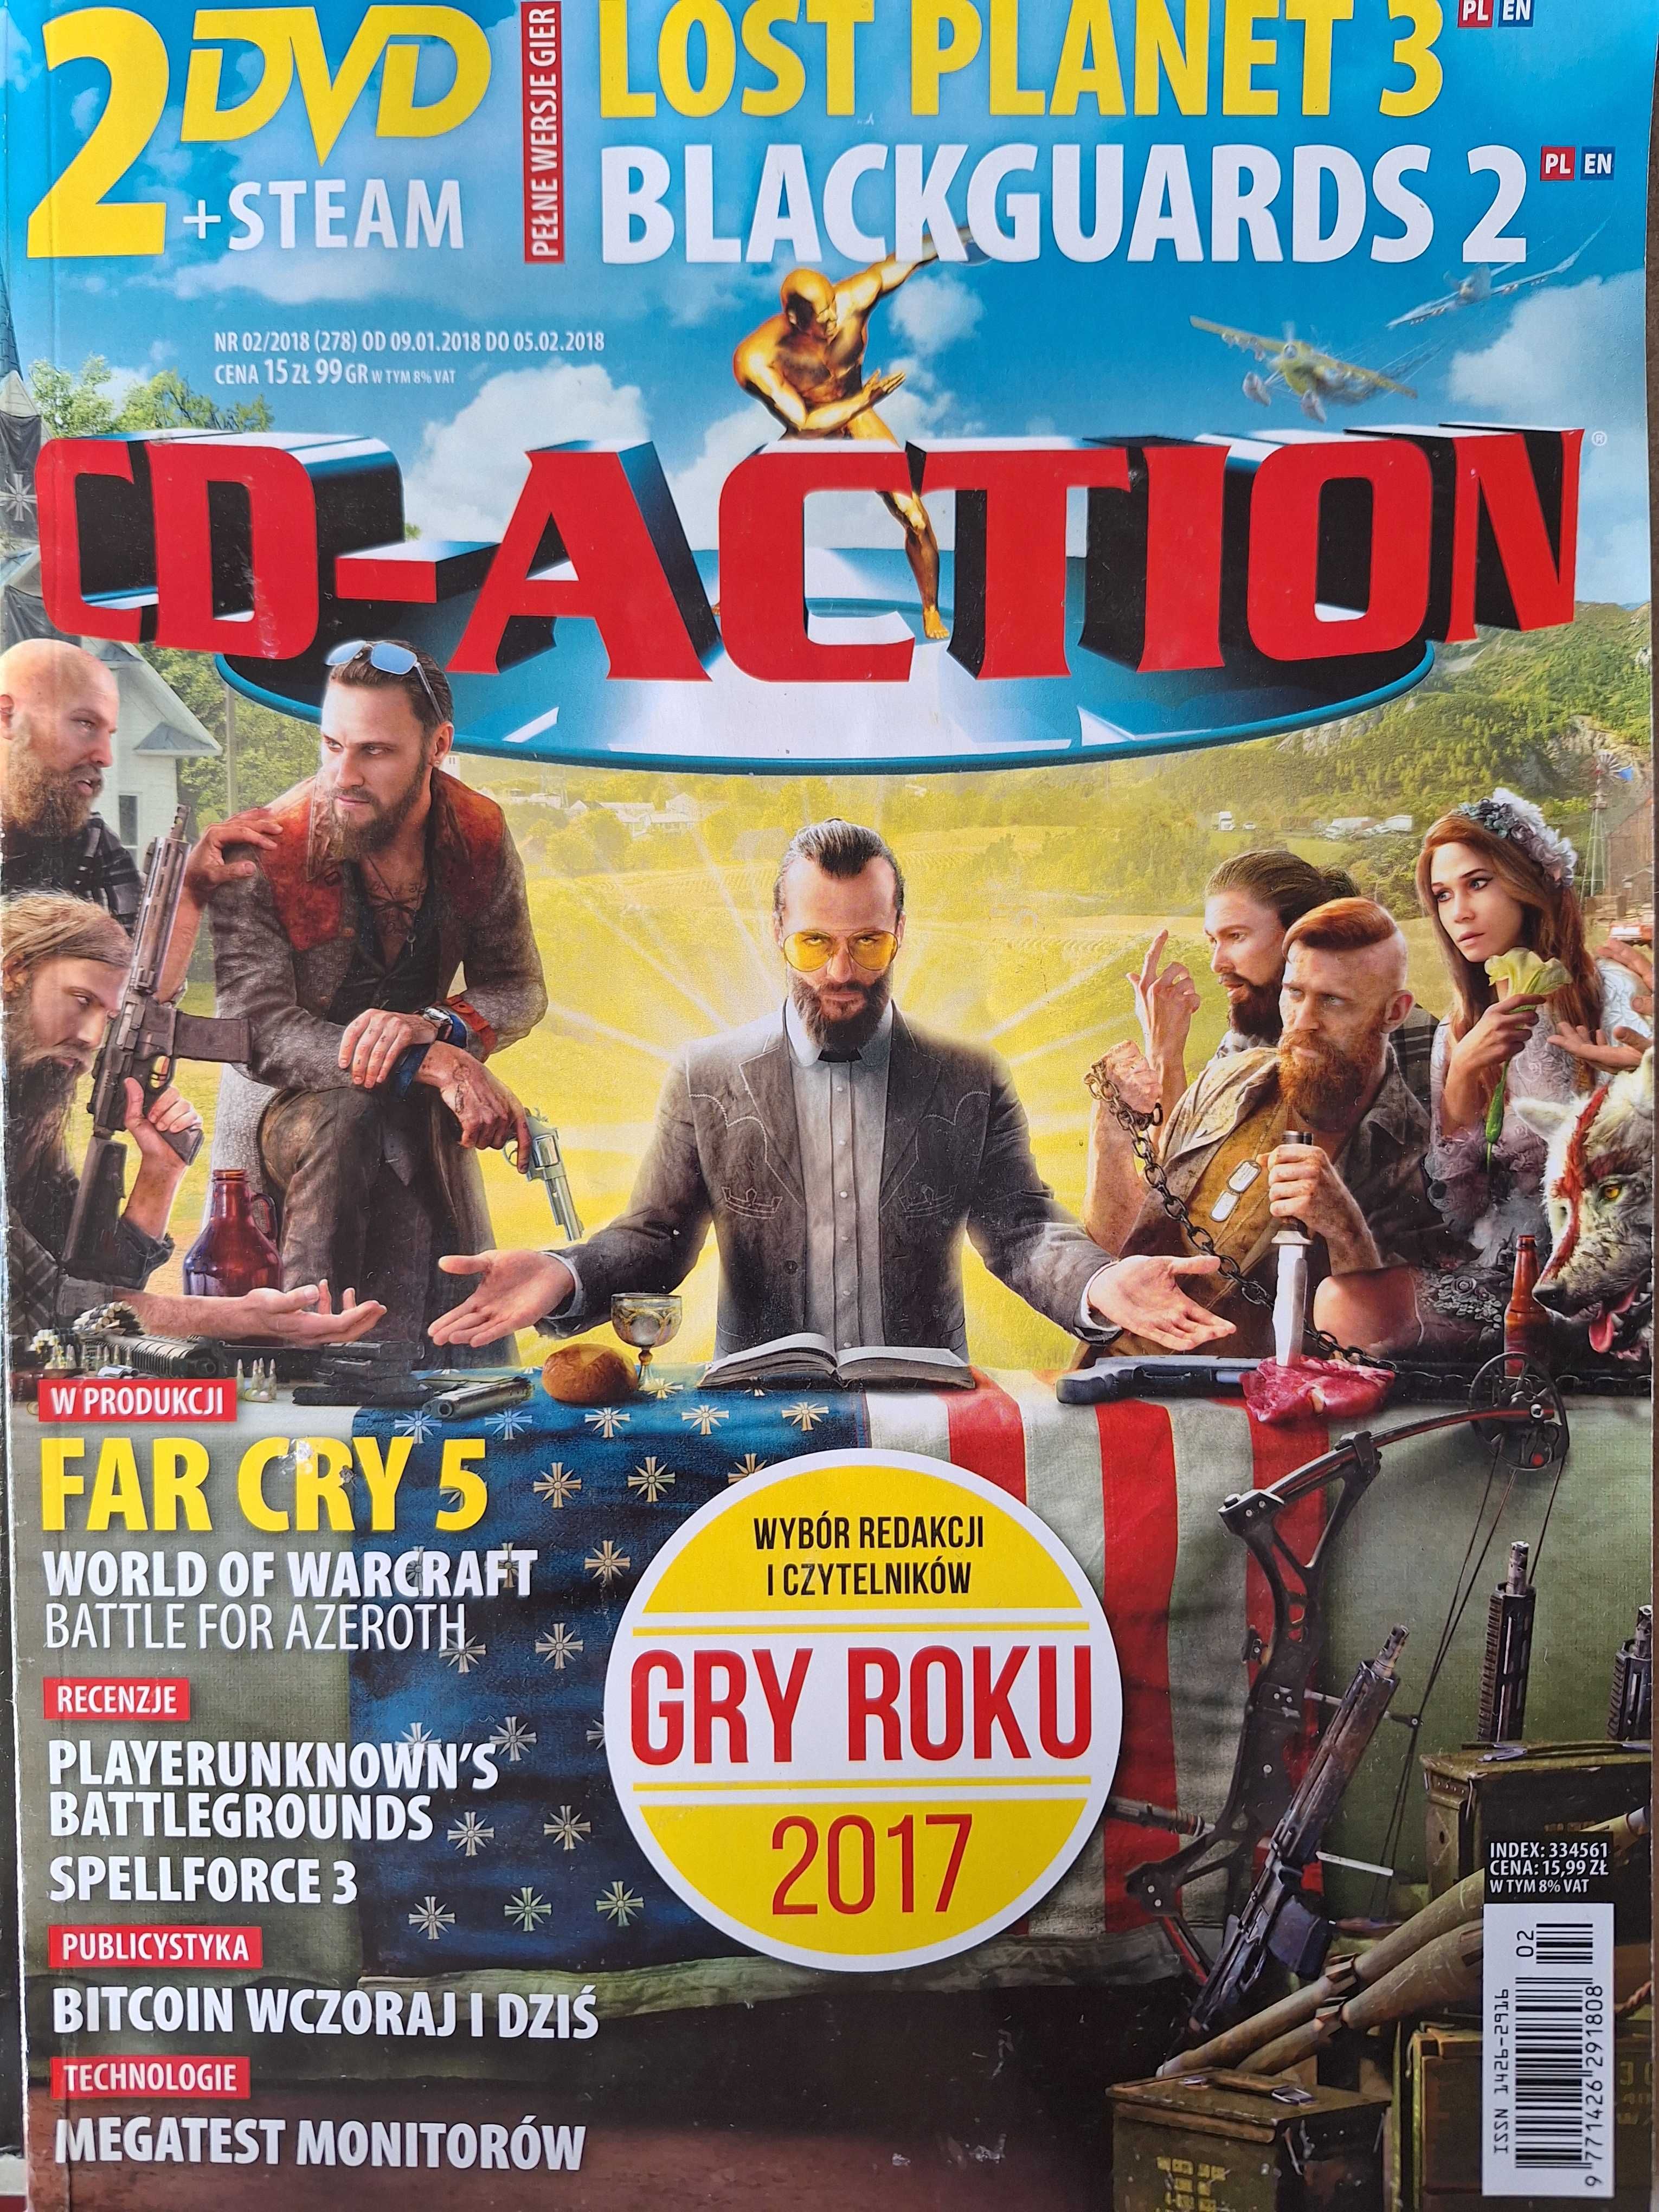 CD-Action 2018 wydania 1-7 DVD